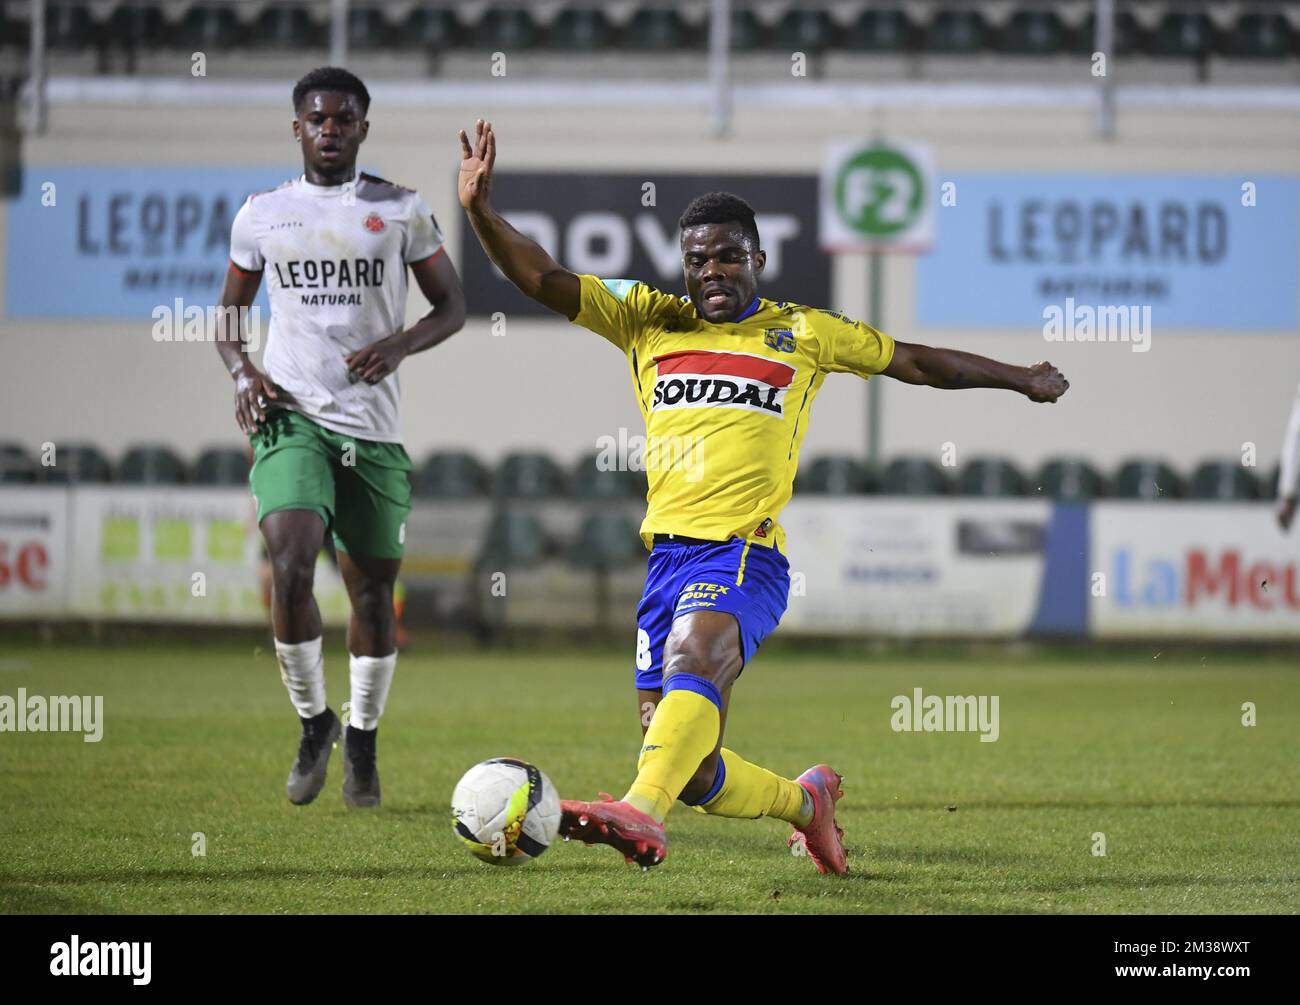 Westerlo's Kouya Mabea fights for the ball during a soccer match between Royal Excelsior Virton and KVC Westerlo, Friday 11 March 2022 in Virton, on day 24 of the '1B Pro League' second division of the Belgian soccer championship. BELGA PHOTO JOHN THYS Stock Photo